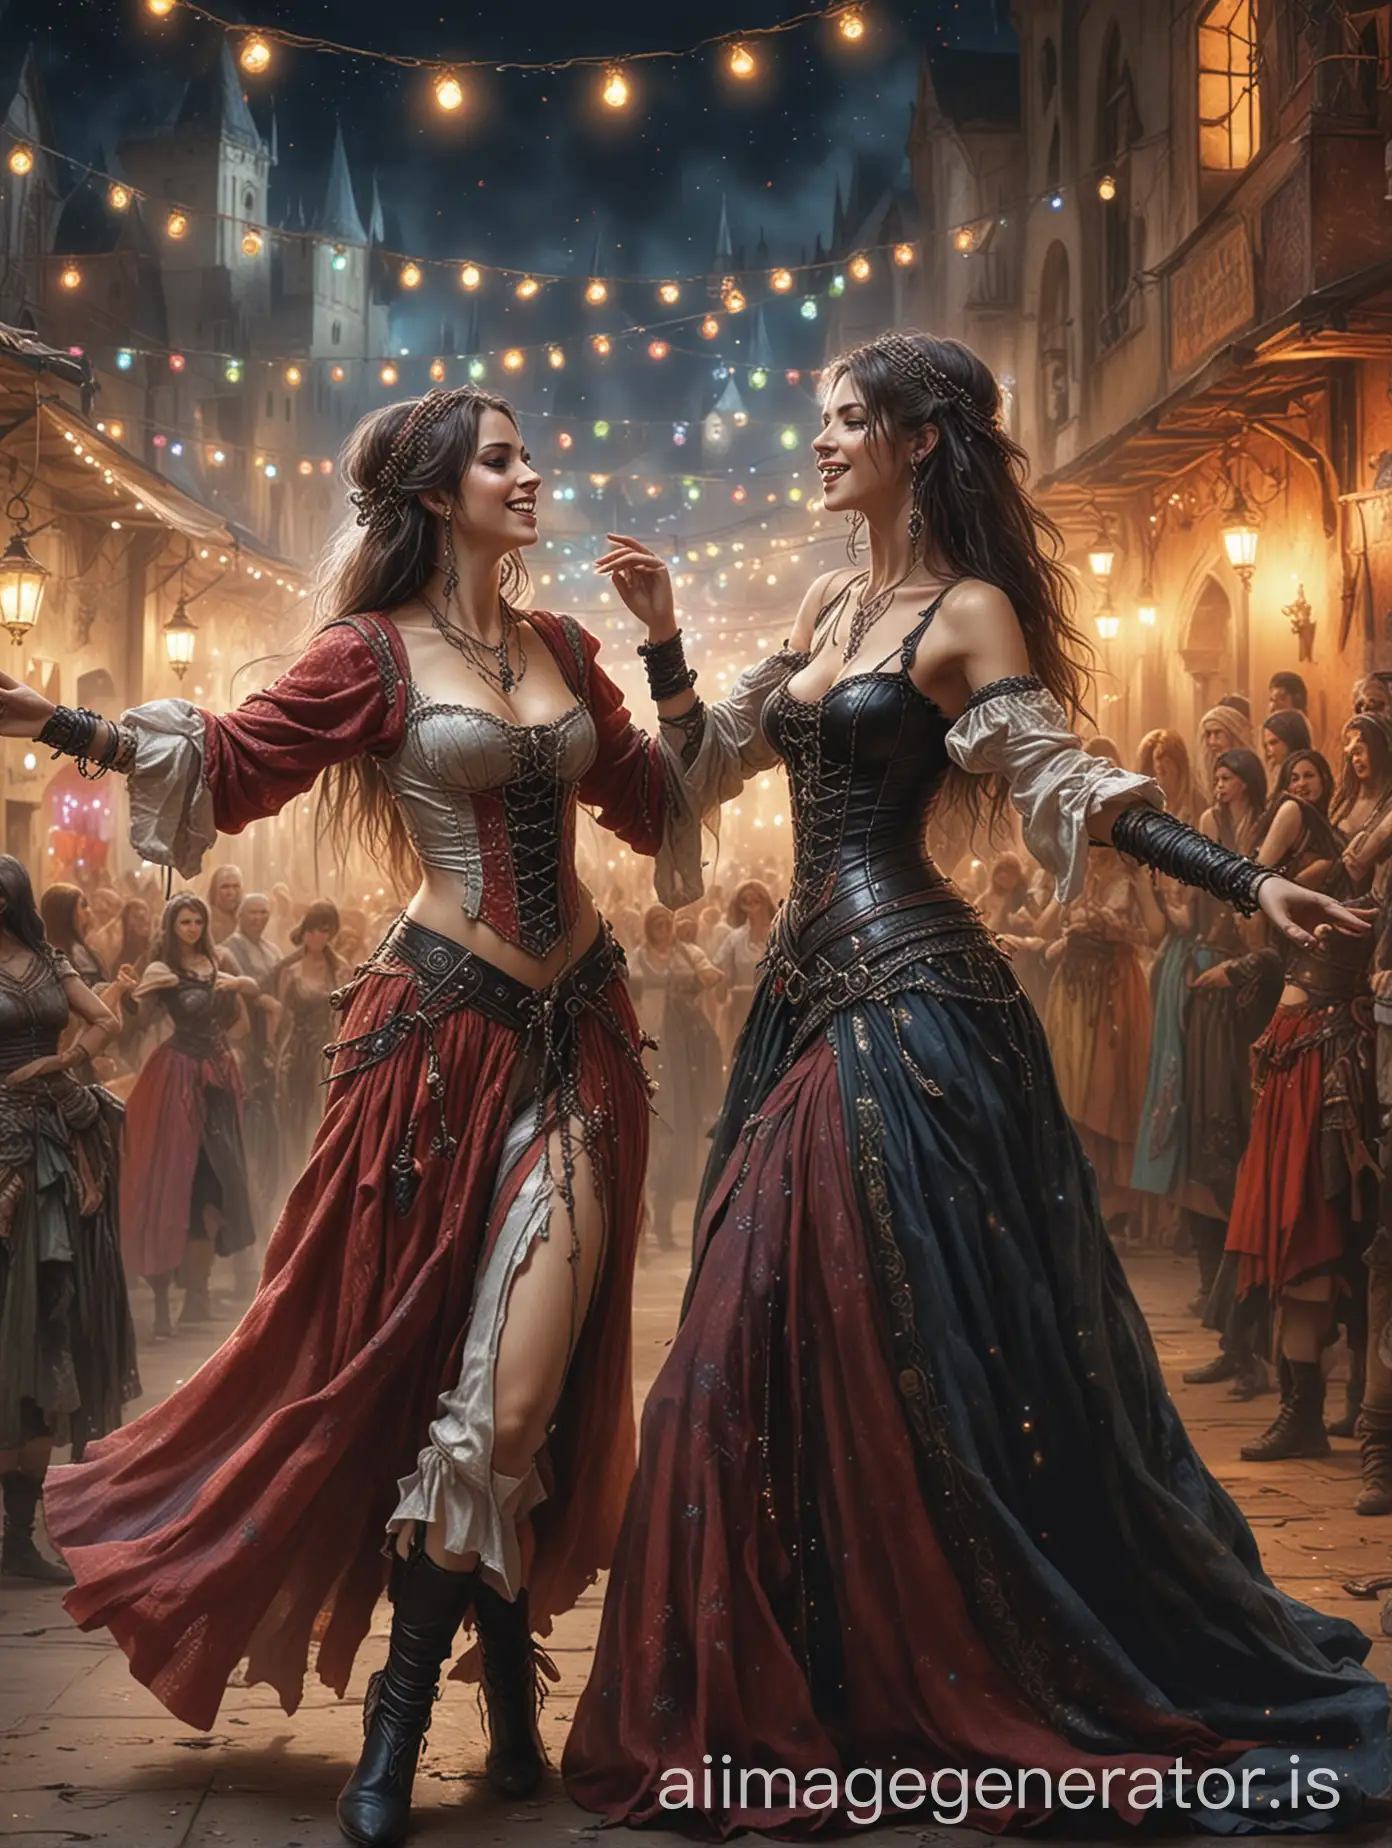 Two-Women-Dancing-at-a-Festival-in-Medieval-Attire